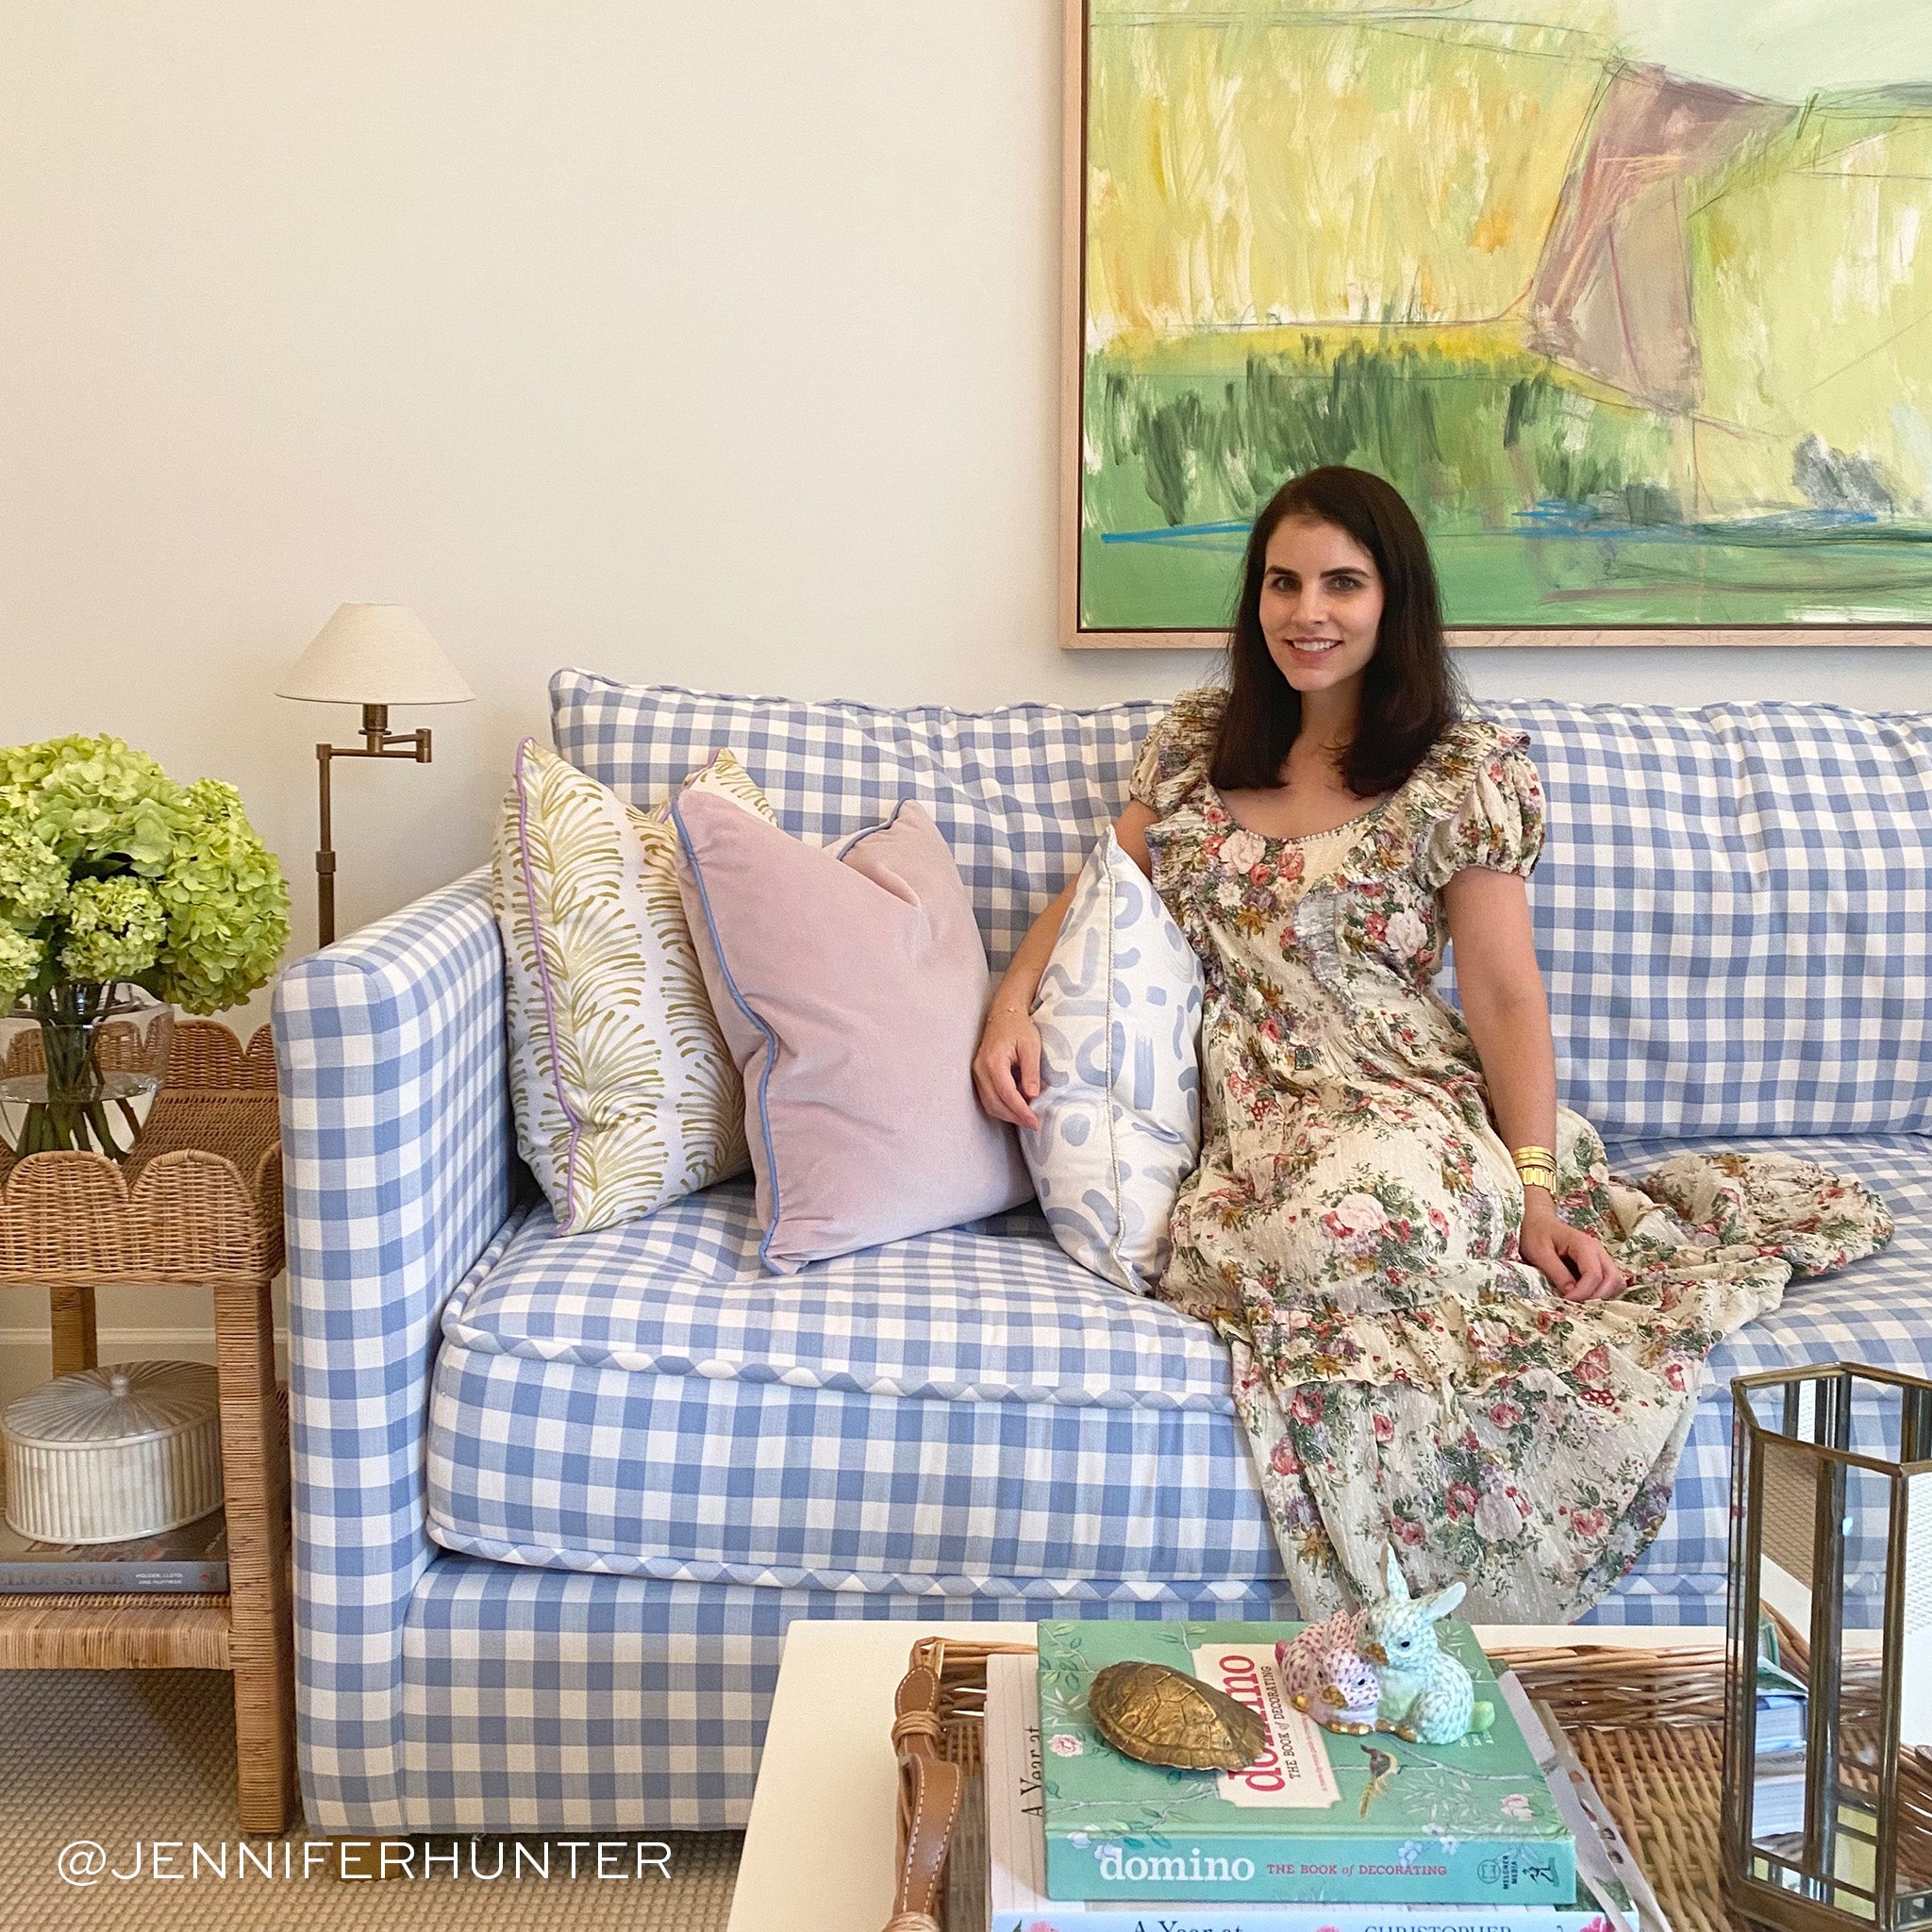 Living room styled with Yellow Stripe Chartreuse Printed pillow, pink velvet pillow, and sky blue printed pillow on blue and white couch next to brunette woman wearing a cream floral dress next to white coffee table with books and decorations. Photo taken by Jennifer Hunter